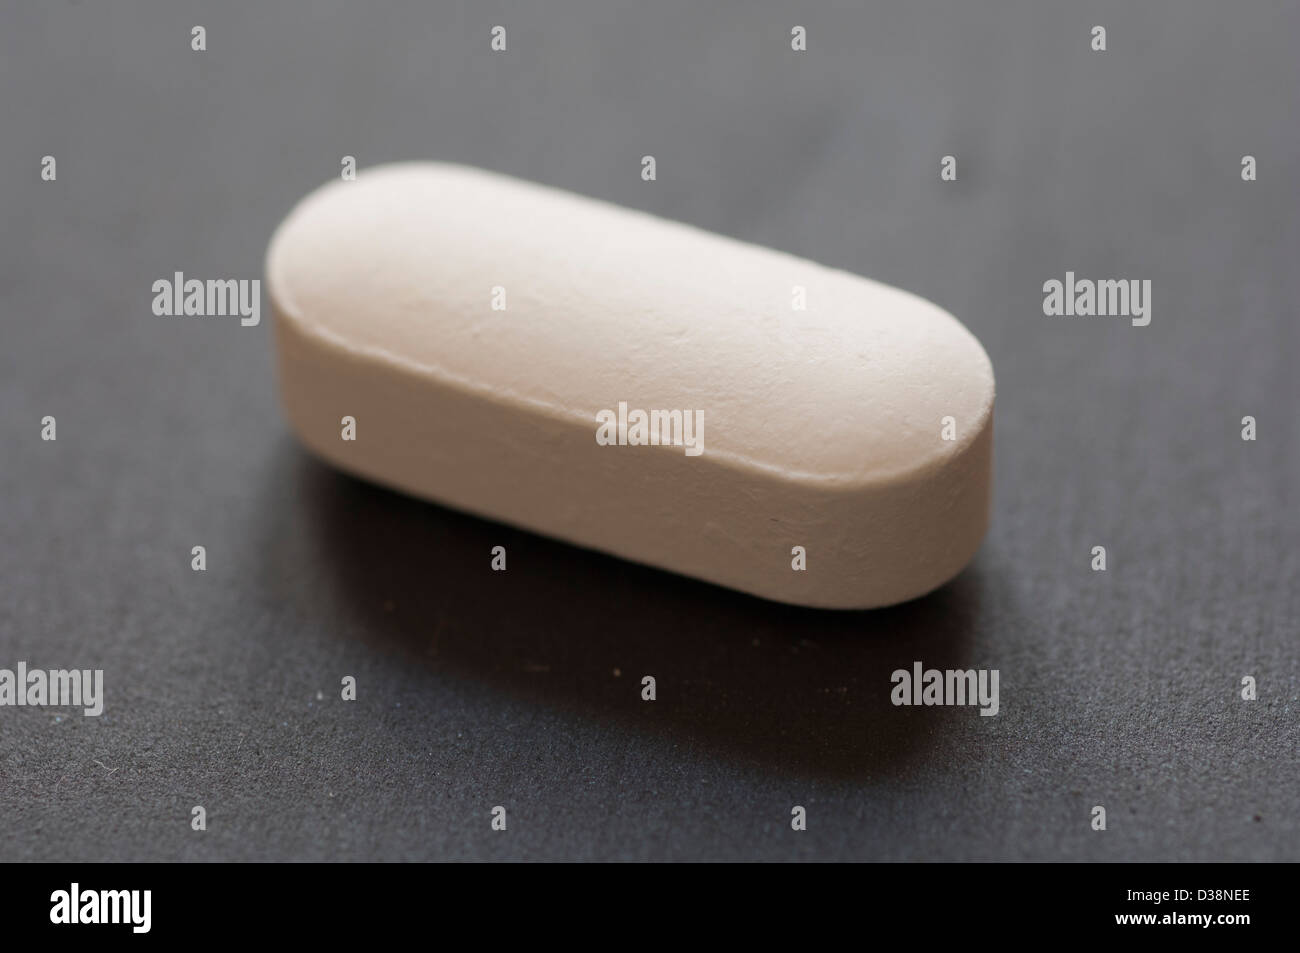 Close-up view of Glutamine Tablet dietary supplement Stock Photo